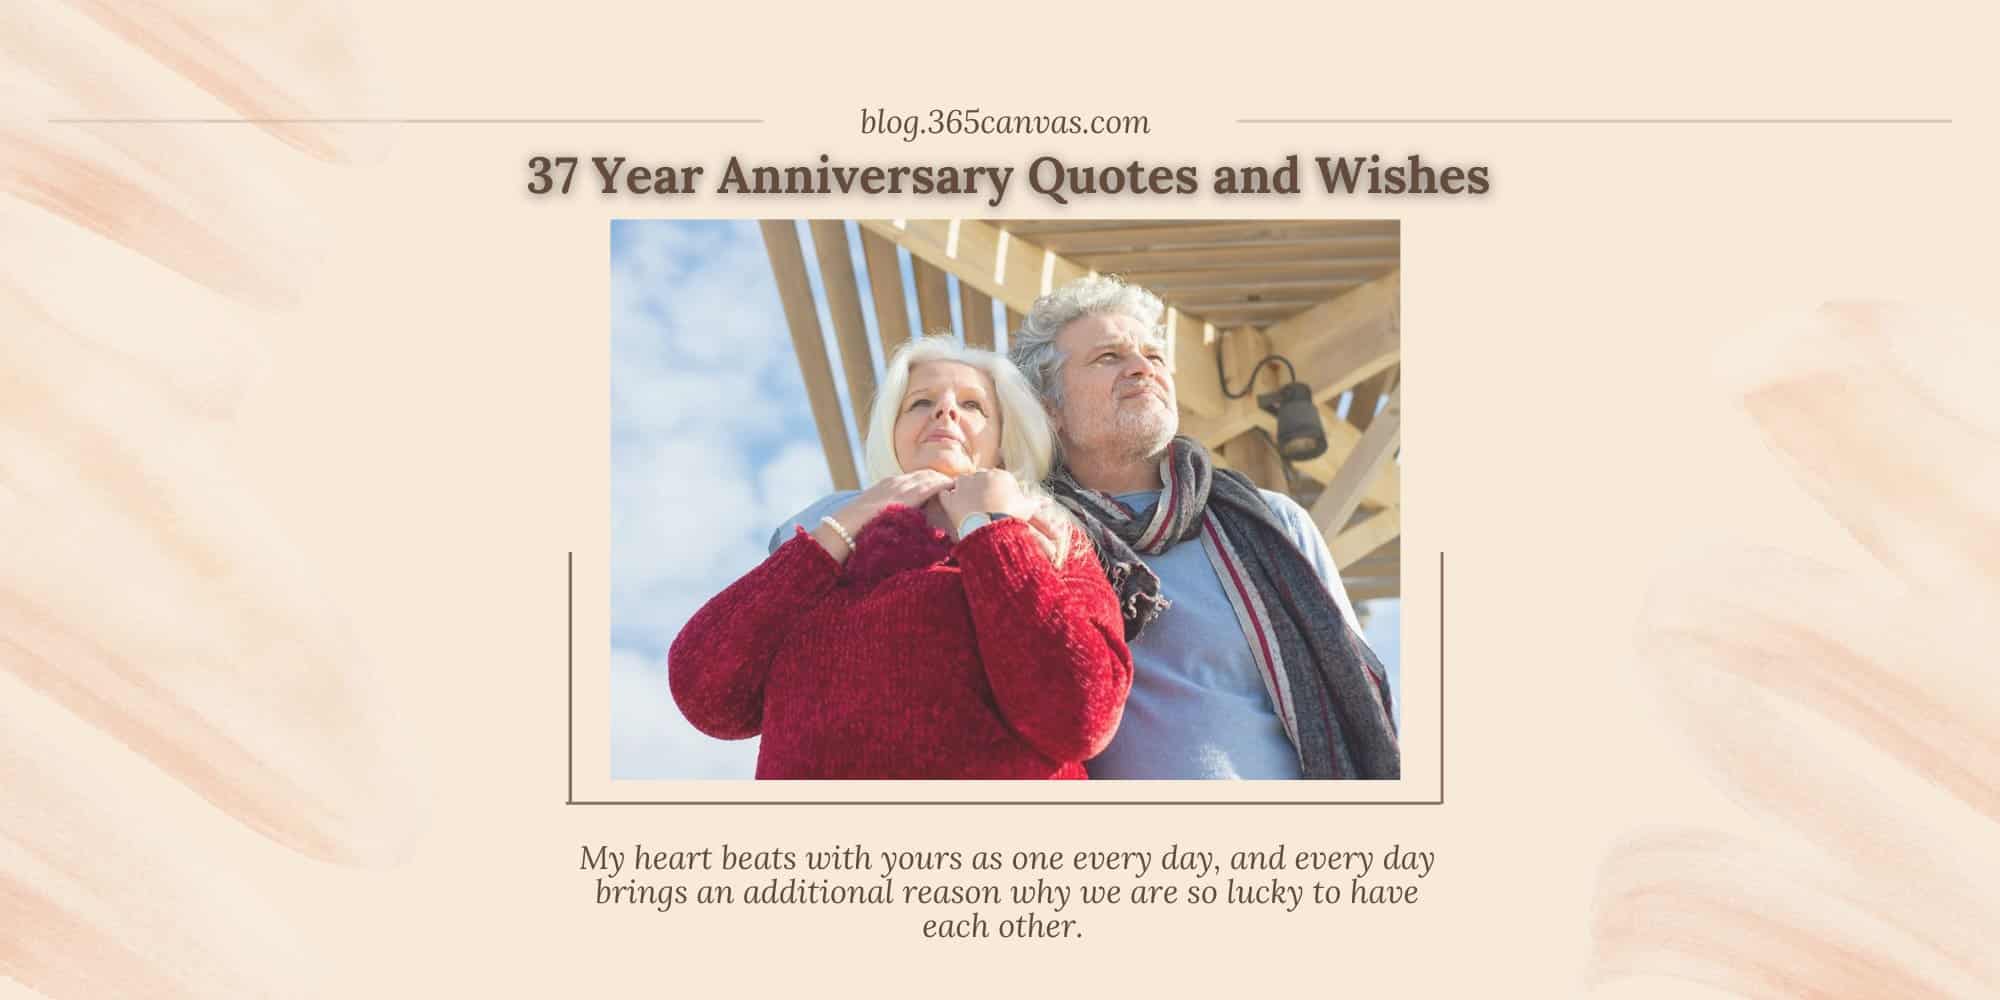 40+ Best 37th Year Book Anniversary Quotes, Wishes and Messages with Image